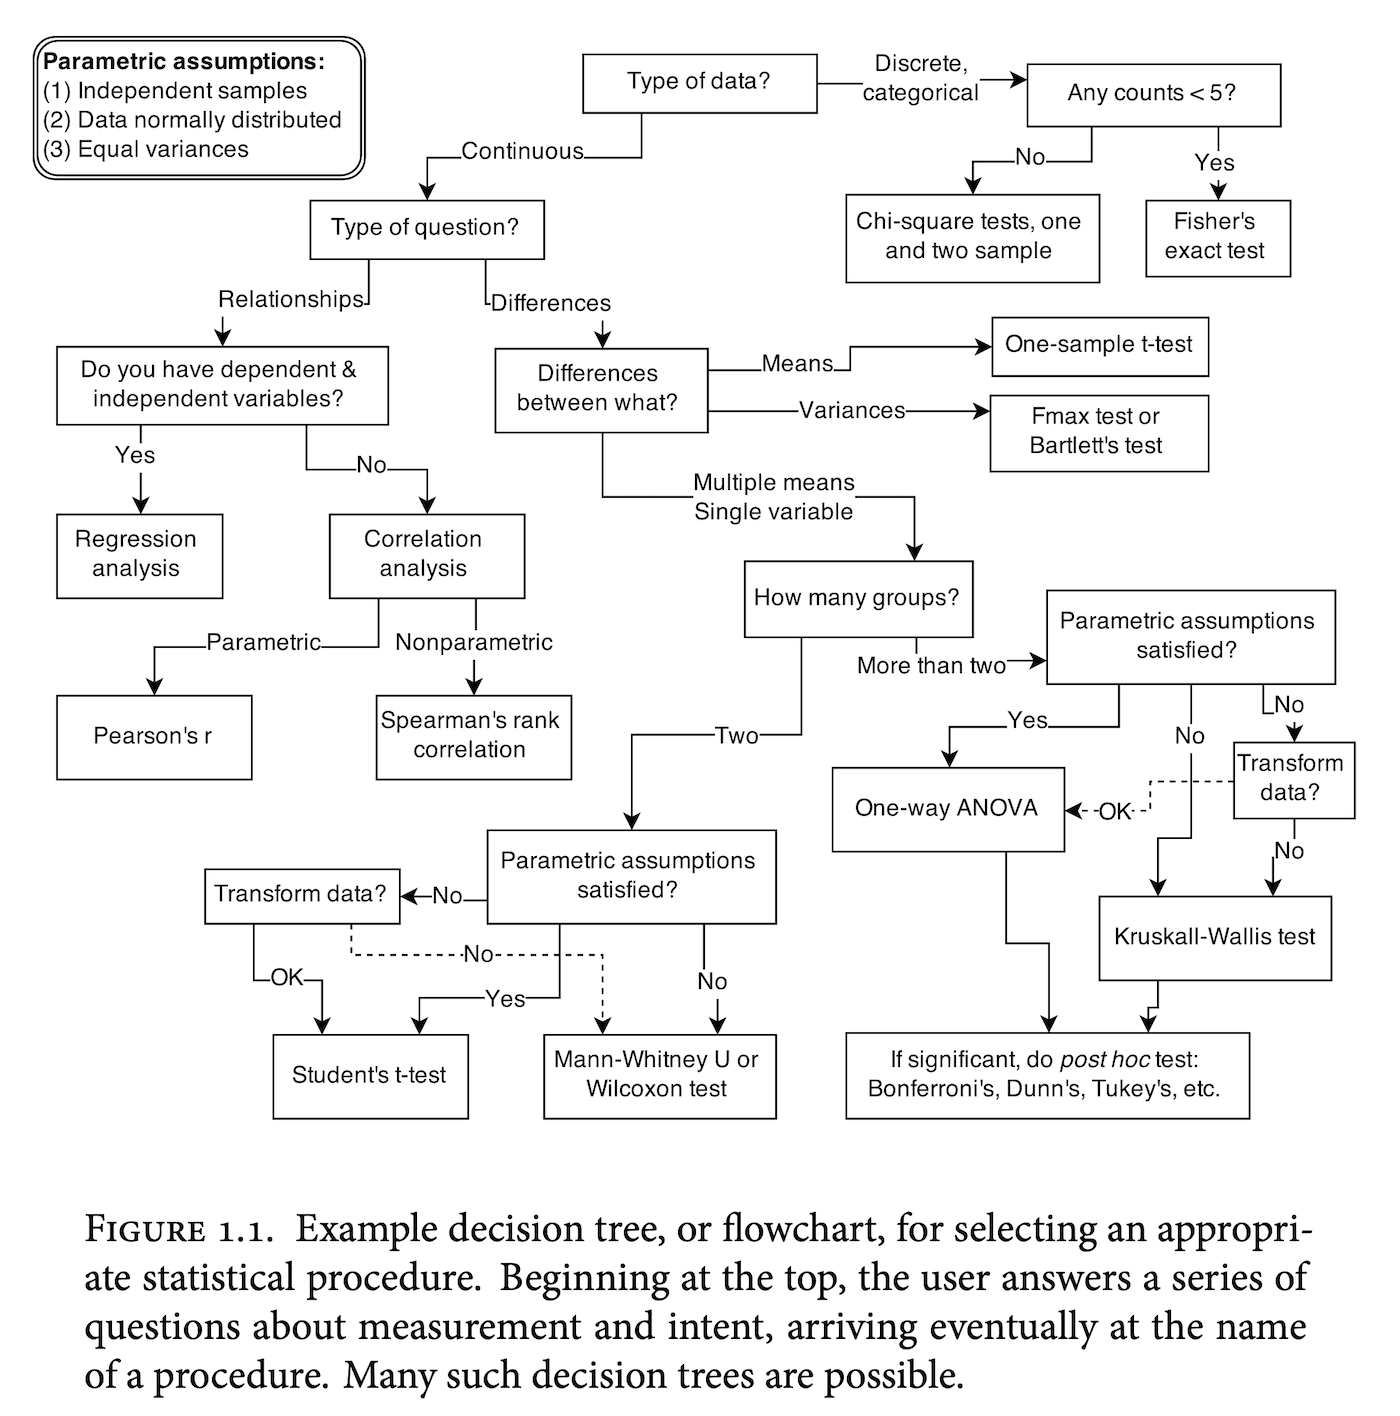 Example decision tree, or flowchart, for selecting an appropri- ate statistical procedure. Beginning at the top, the user answers a series of questions about measurement and intent, arriving eventually at the name of a procedure. Many such decision trees are possible.